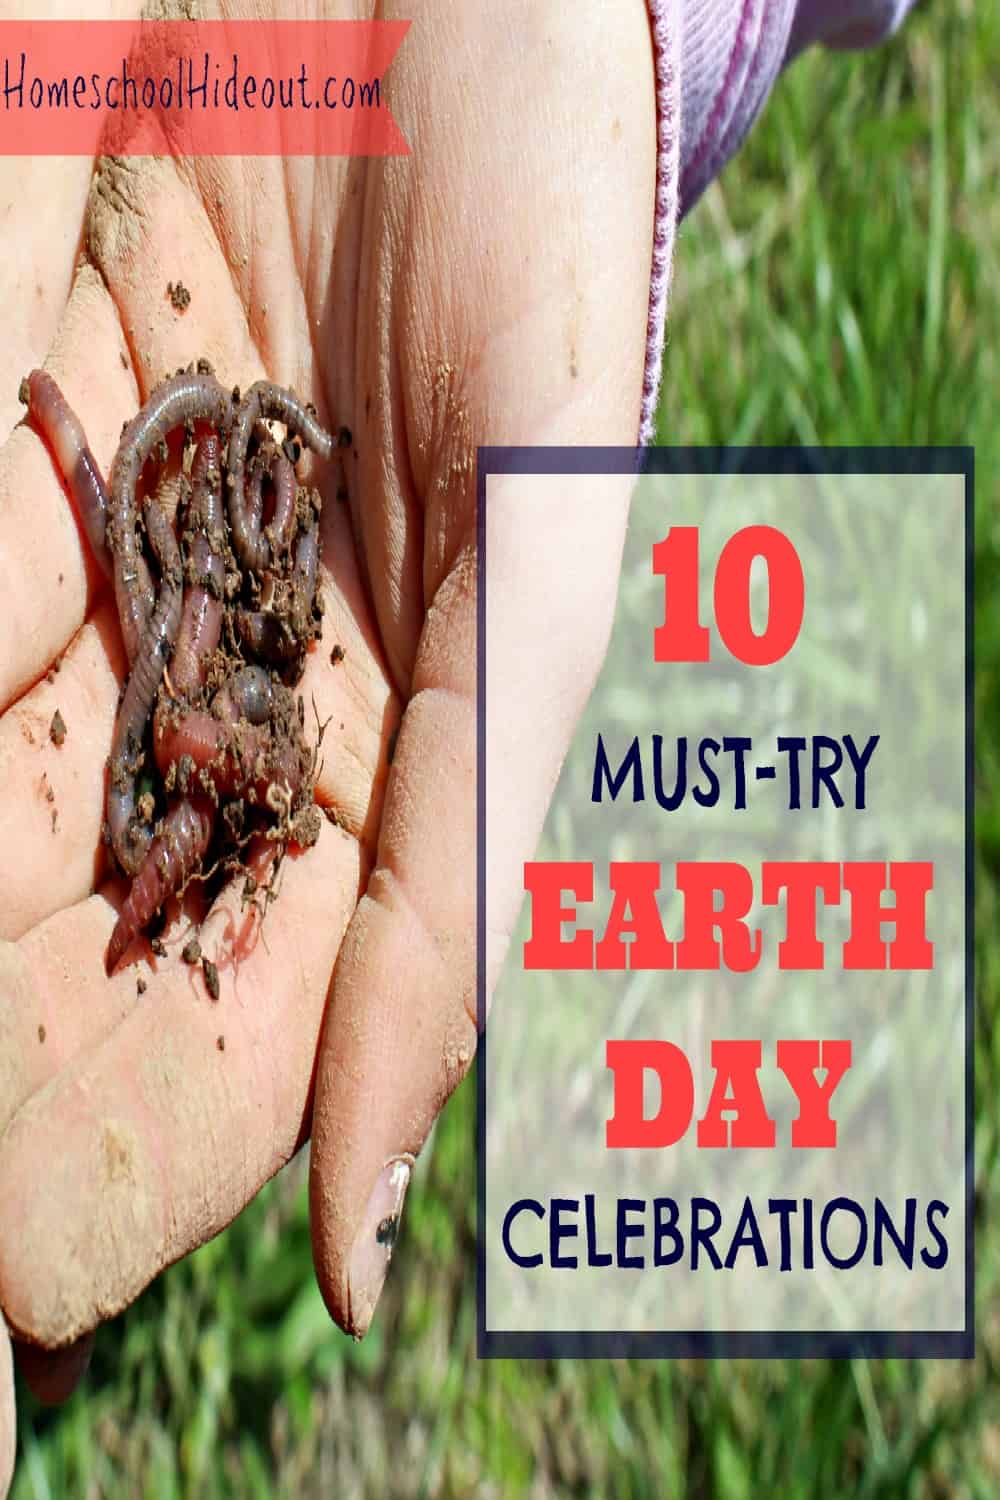 10 of the best ideas to celebrate earth day without spending a lot of money! (HINT: Get your hands dirty!)